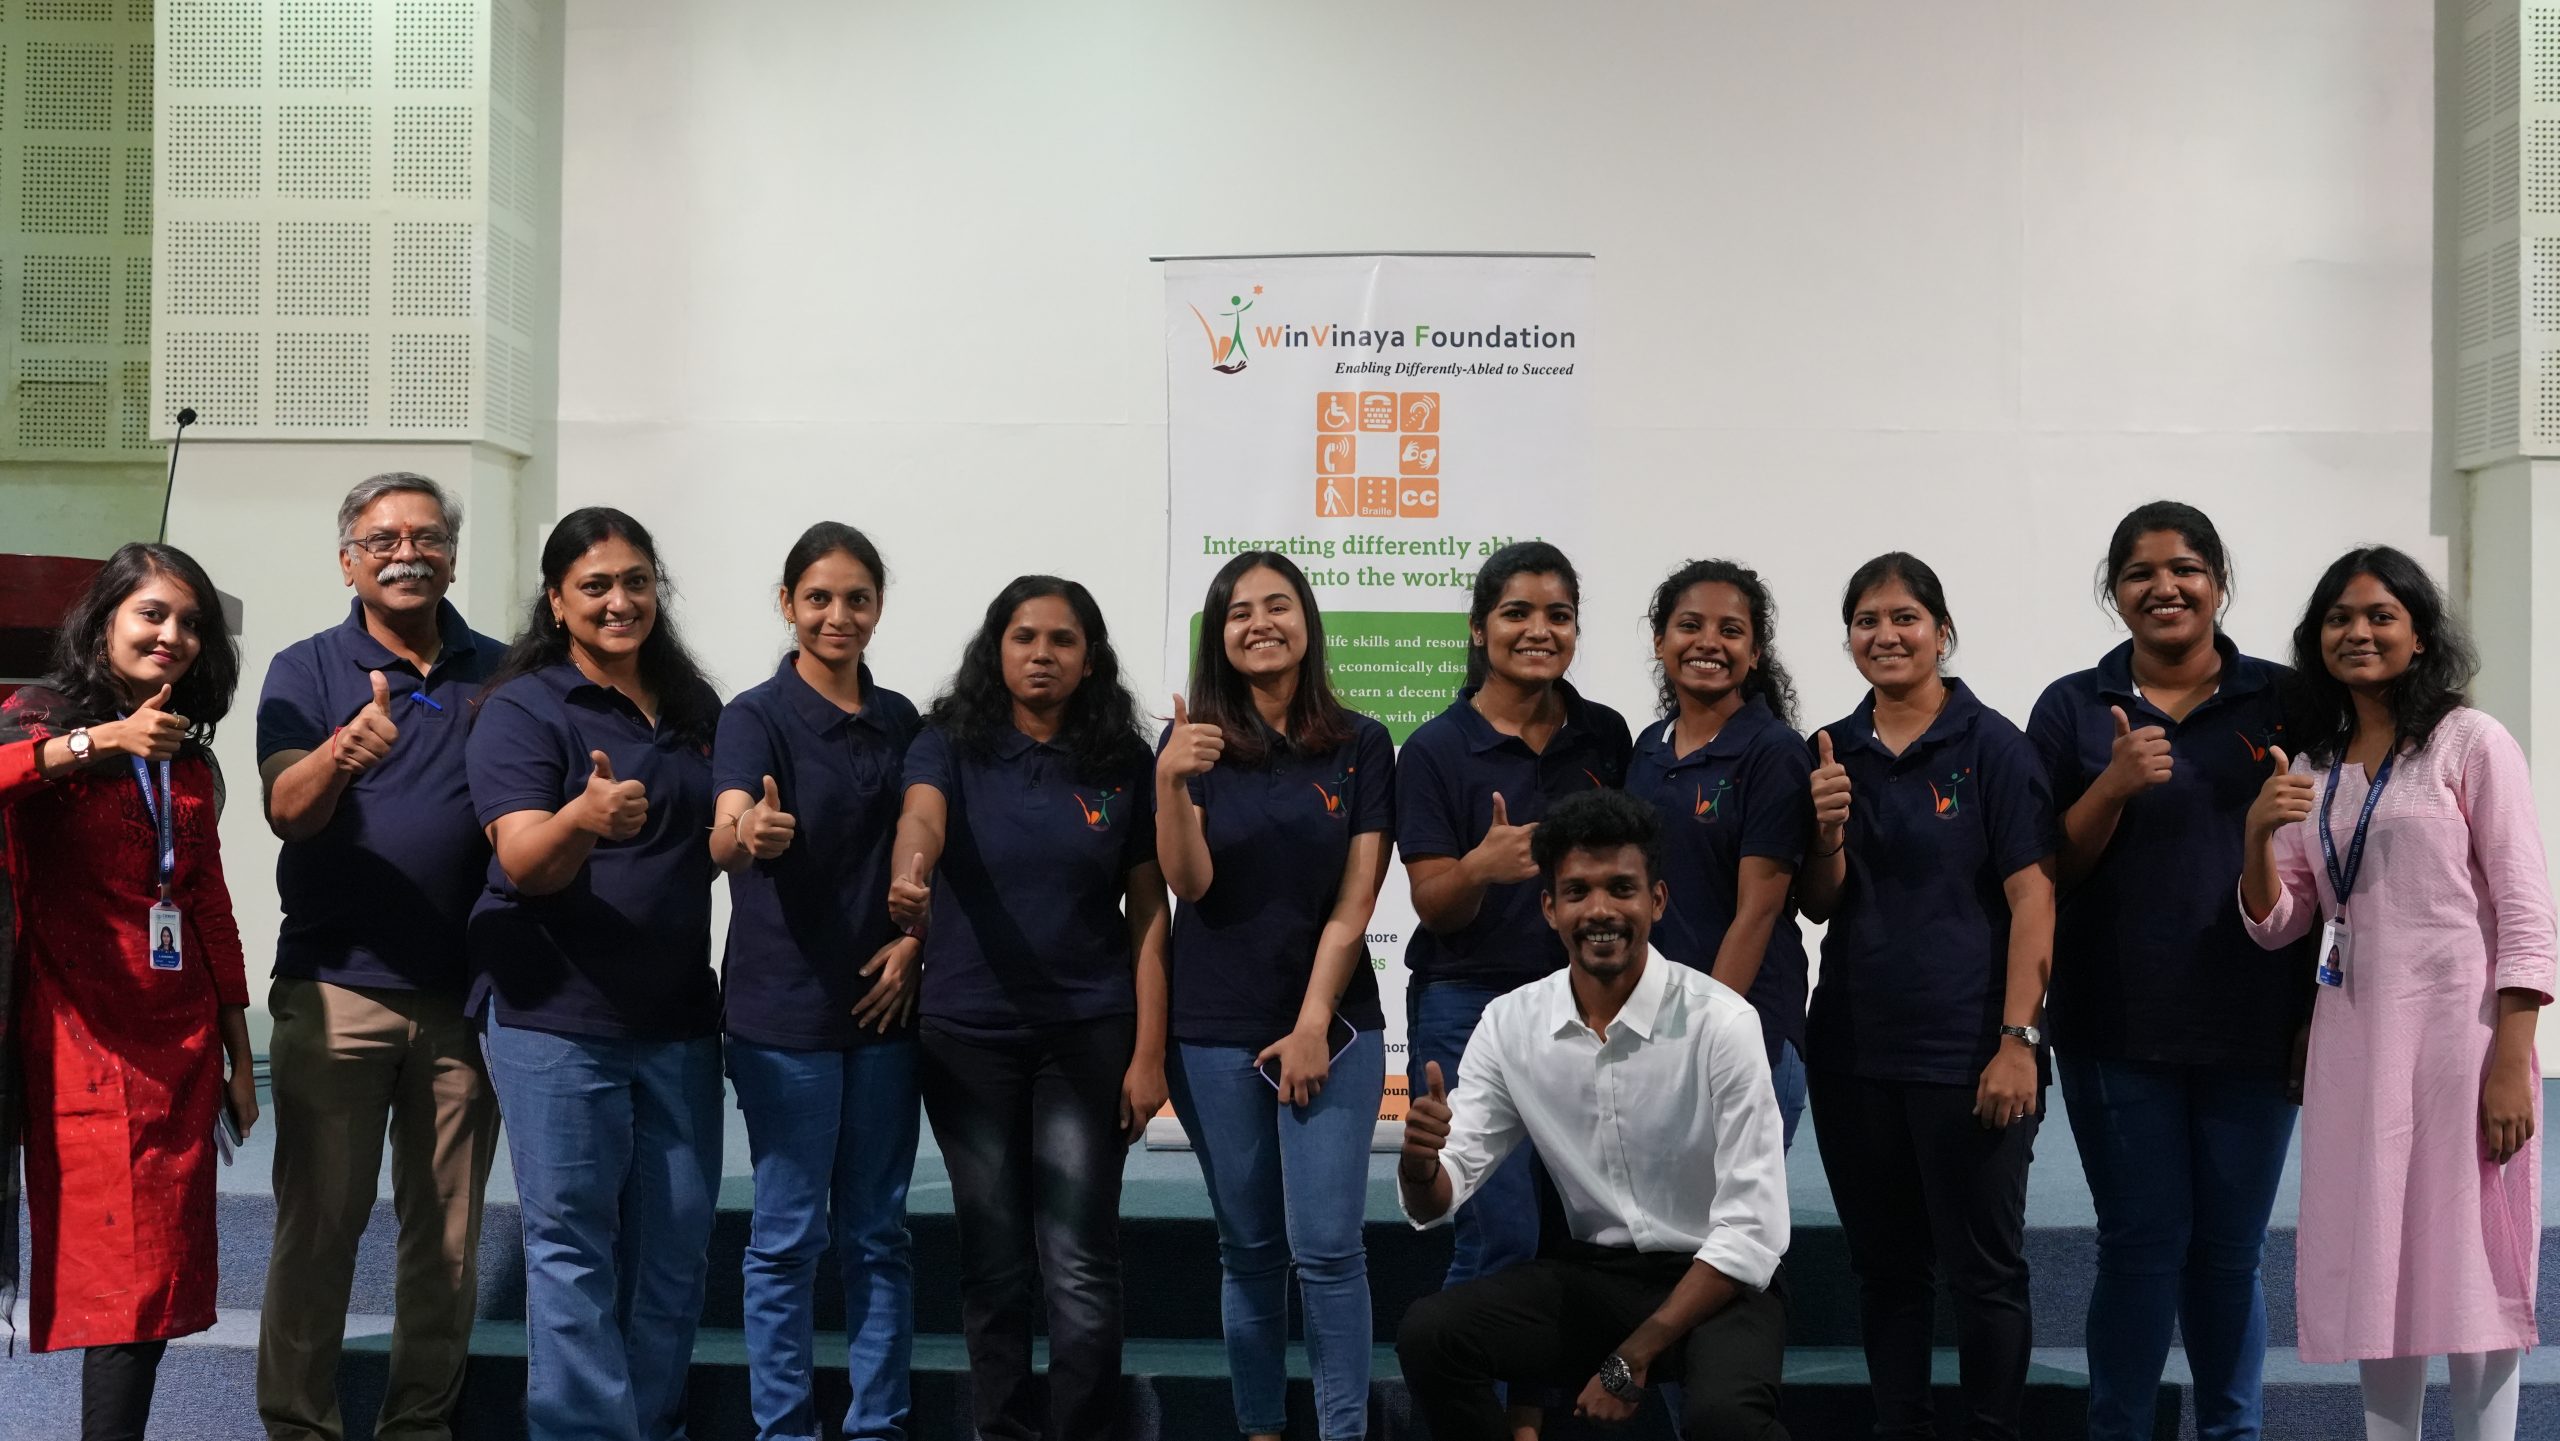 Team WinVinaya posing for a photo during the session at Christ University